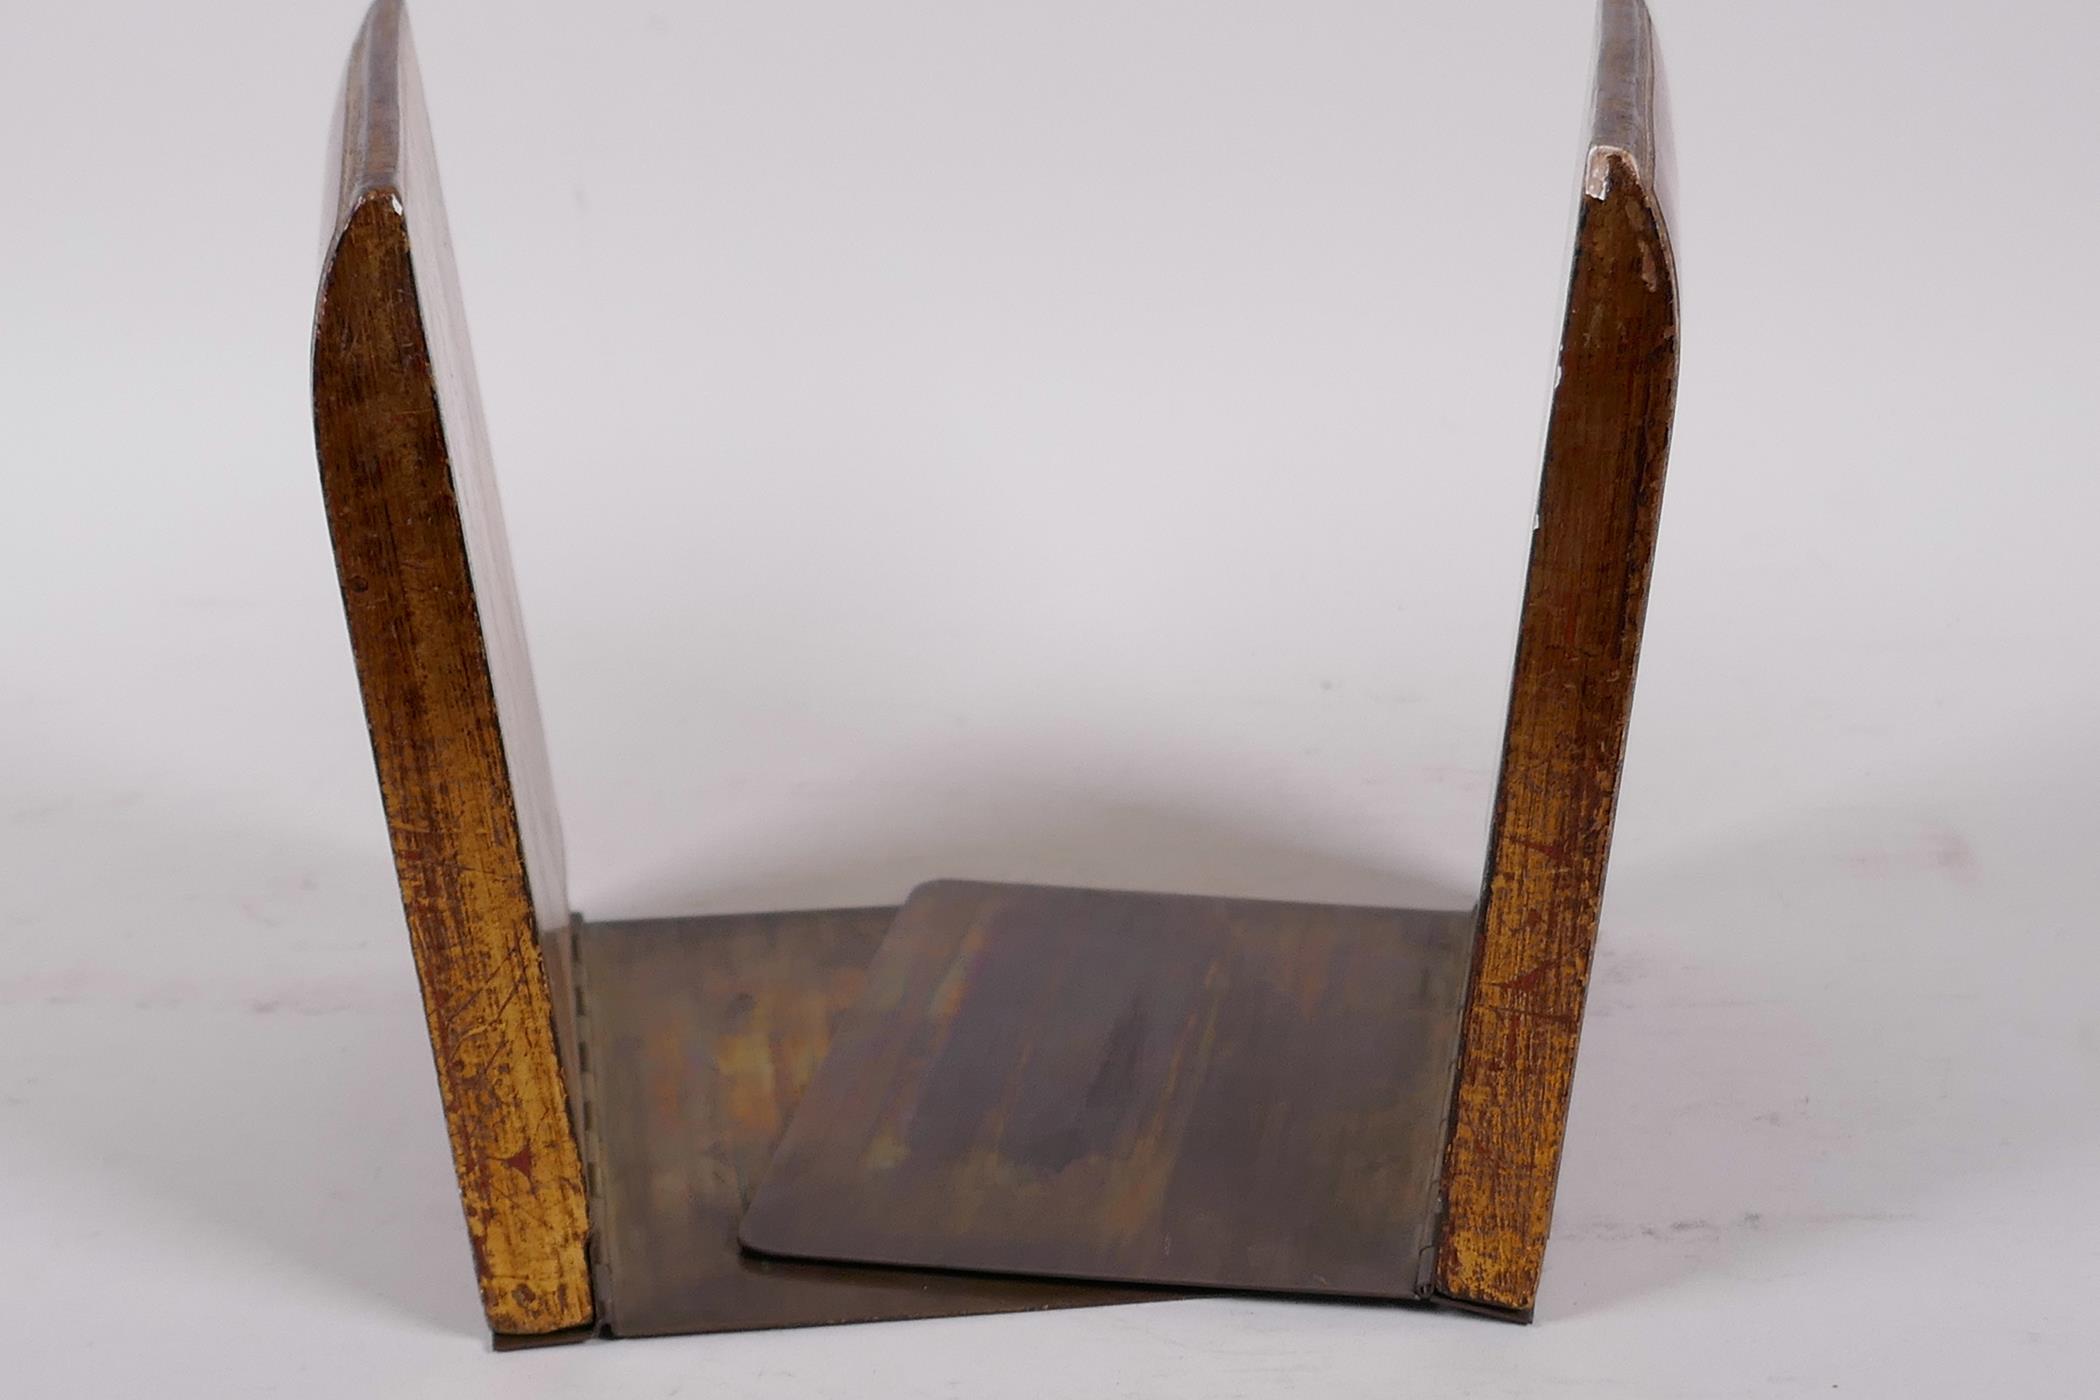 A pair of wood, leather and brass bookends, the wooden ends leather bound in the form of books - Image 3 of 3